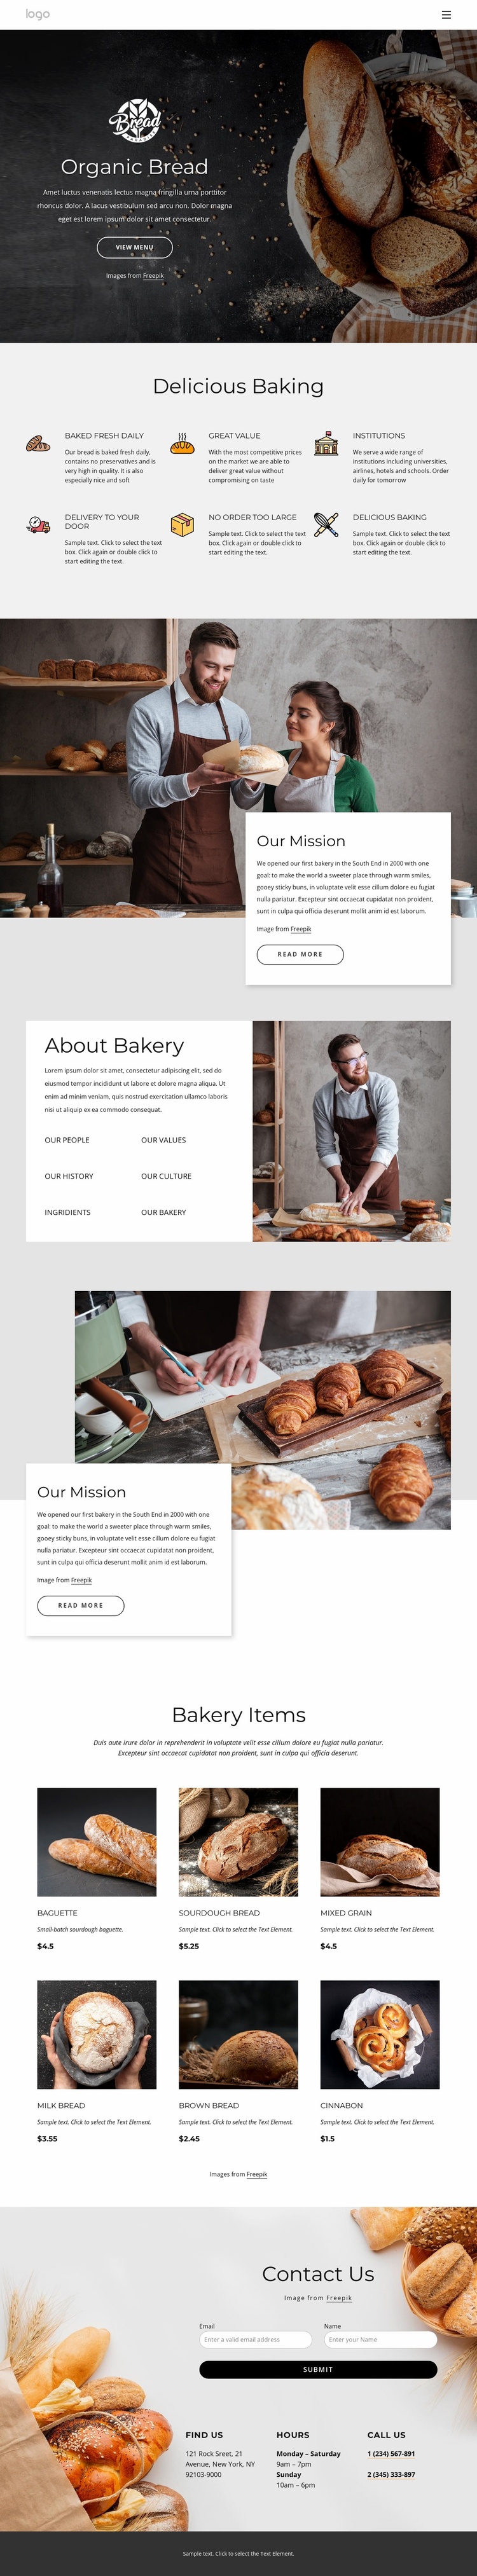 Bagels, buns, rolls, biscuits and loaf breads Website Template